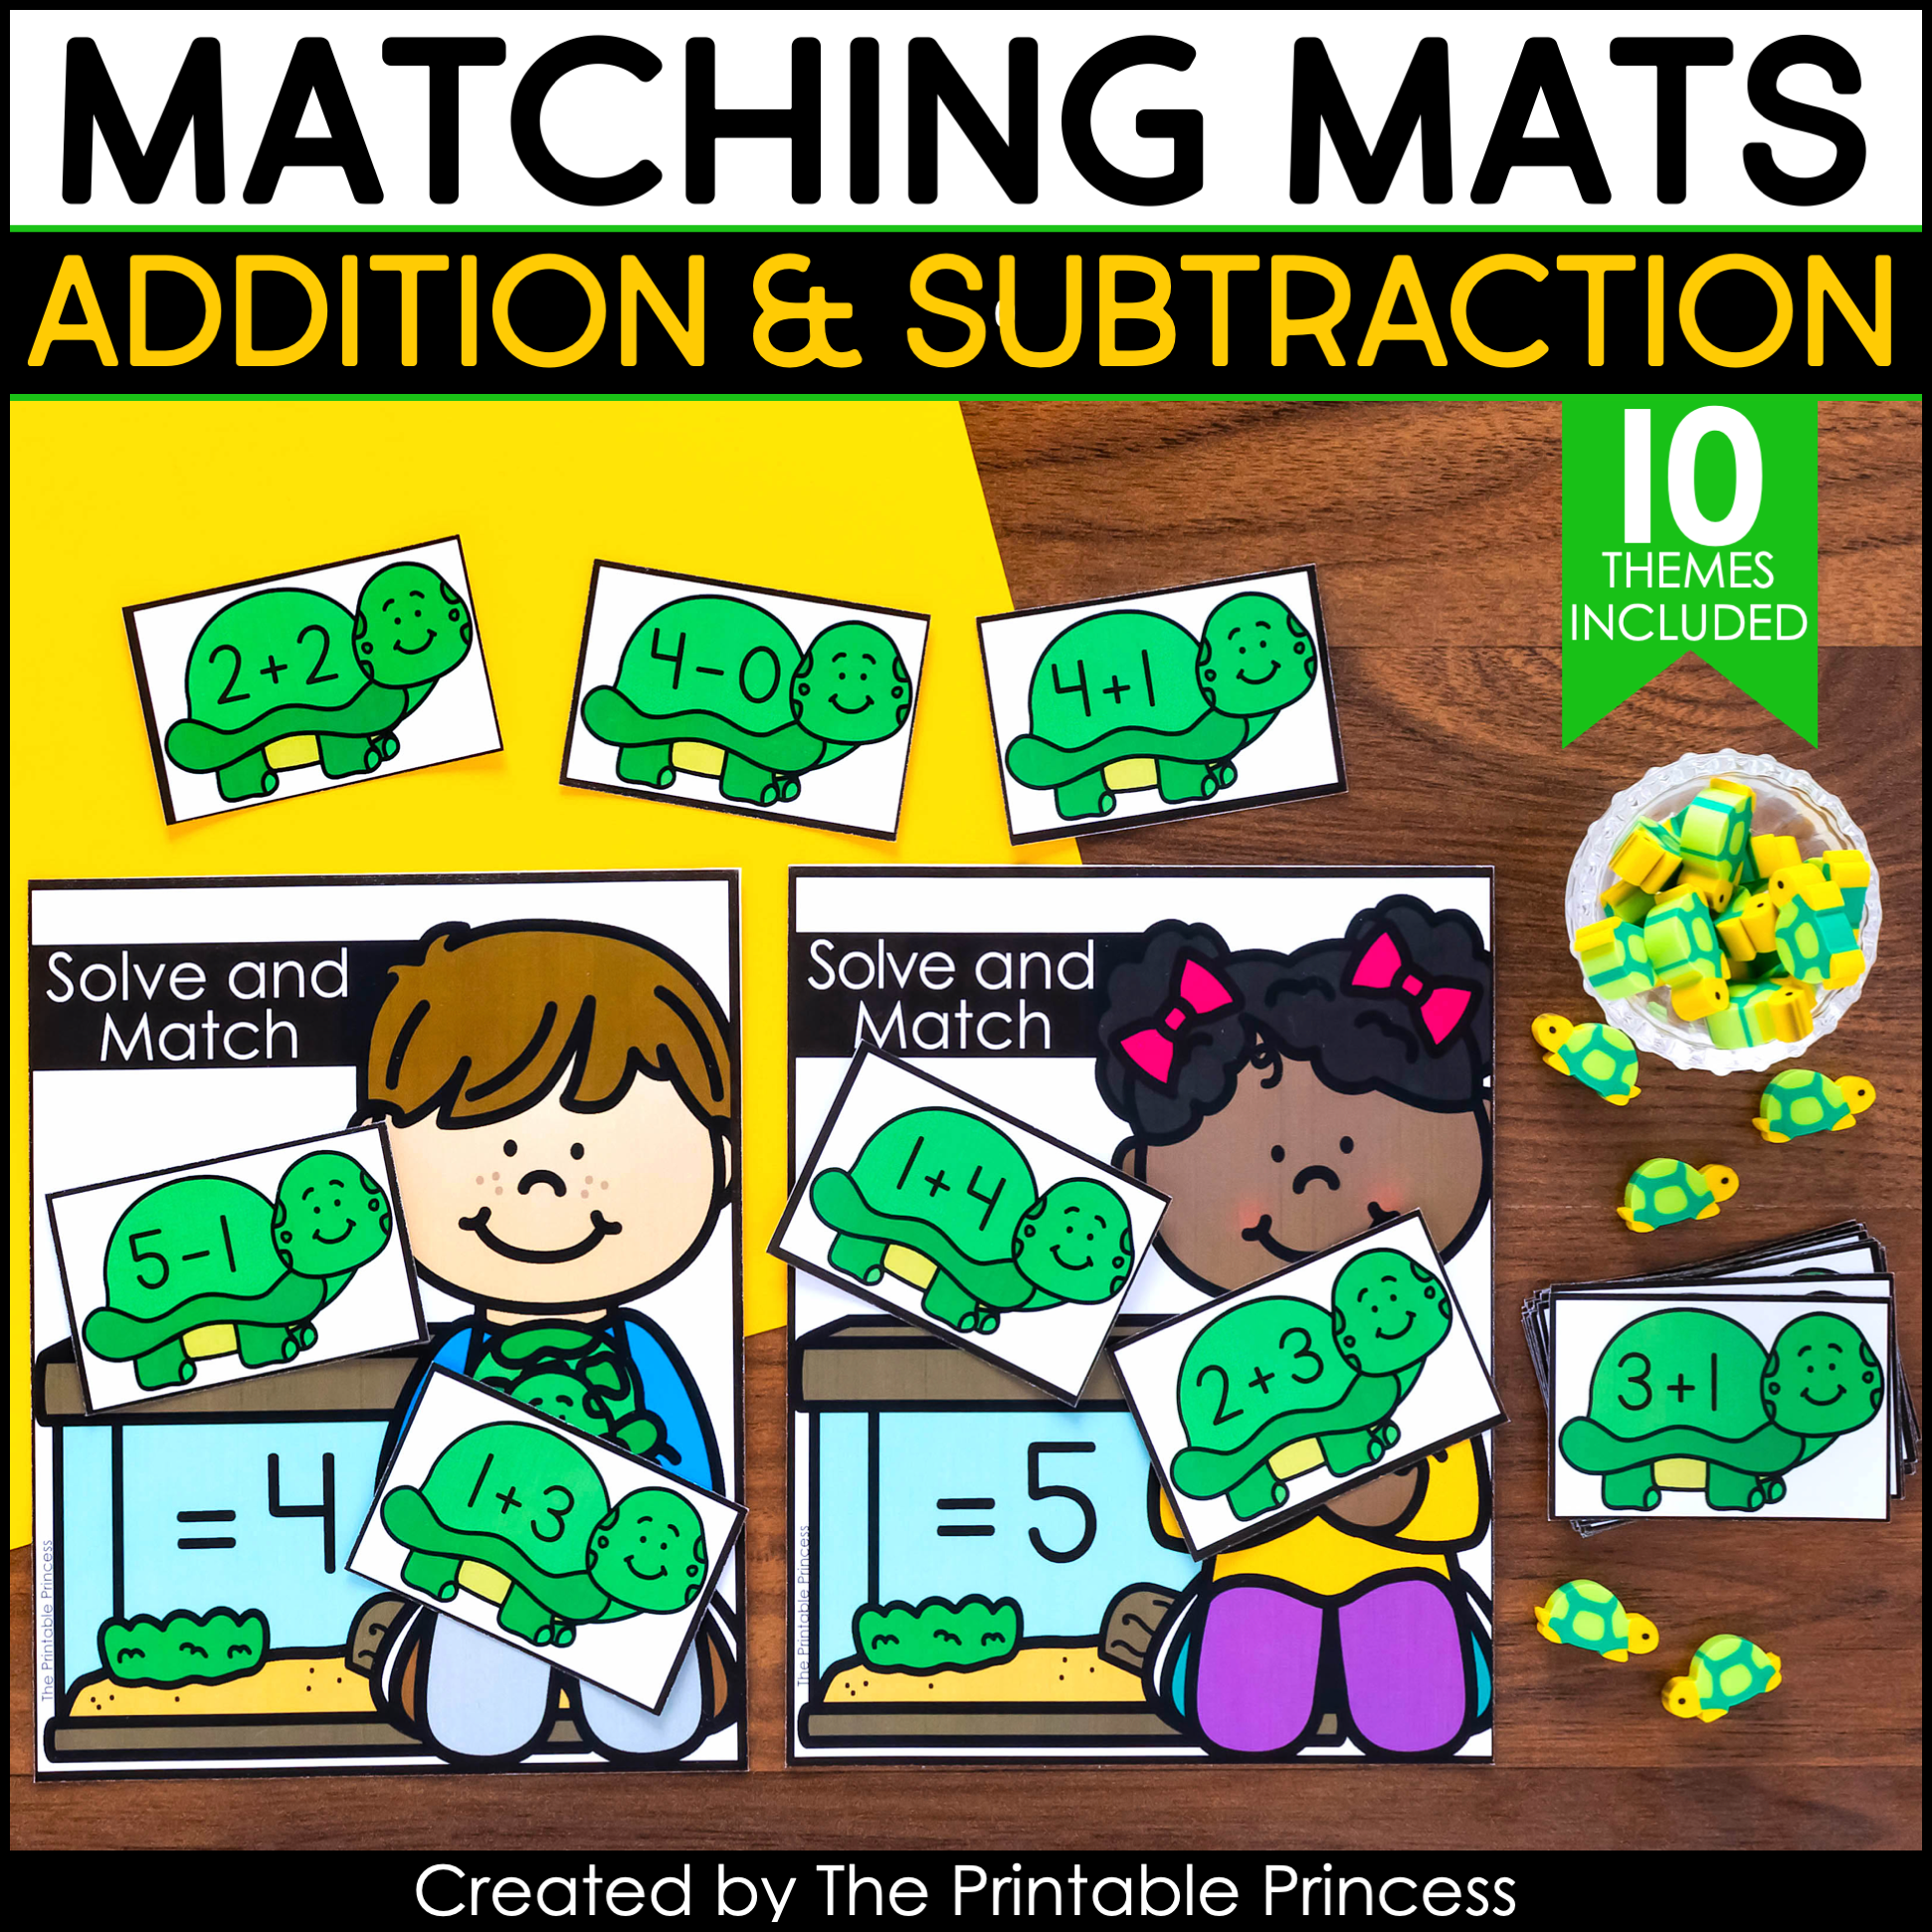 addition-and-subtraction-matching-activities-the-printable-princess